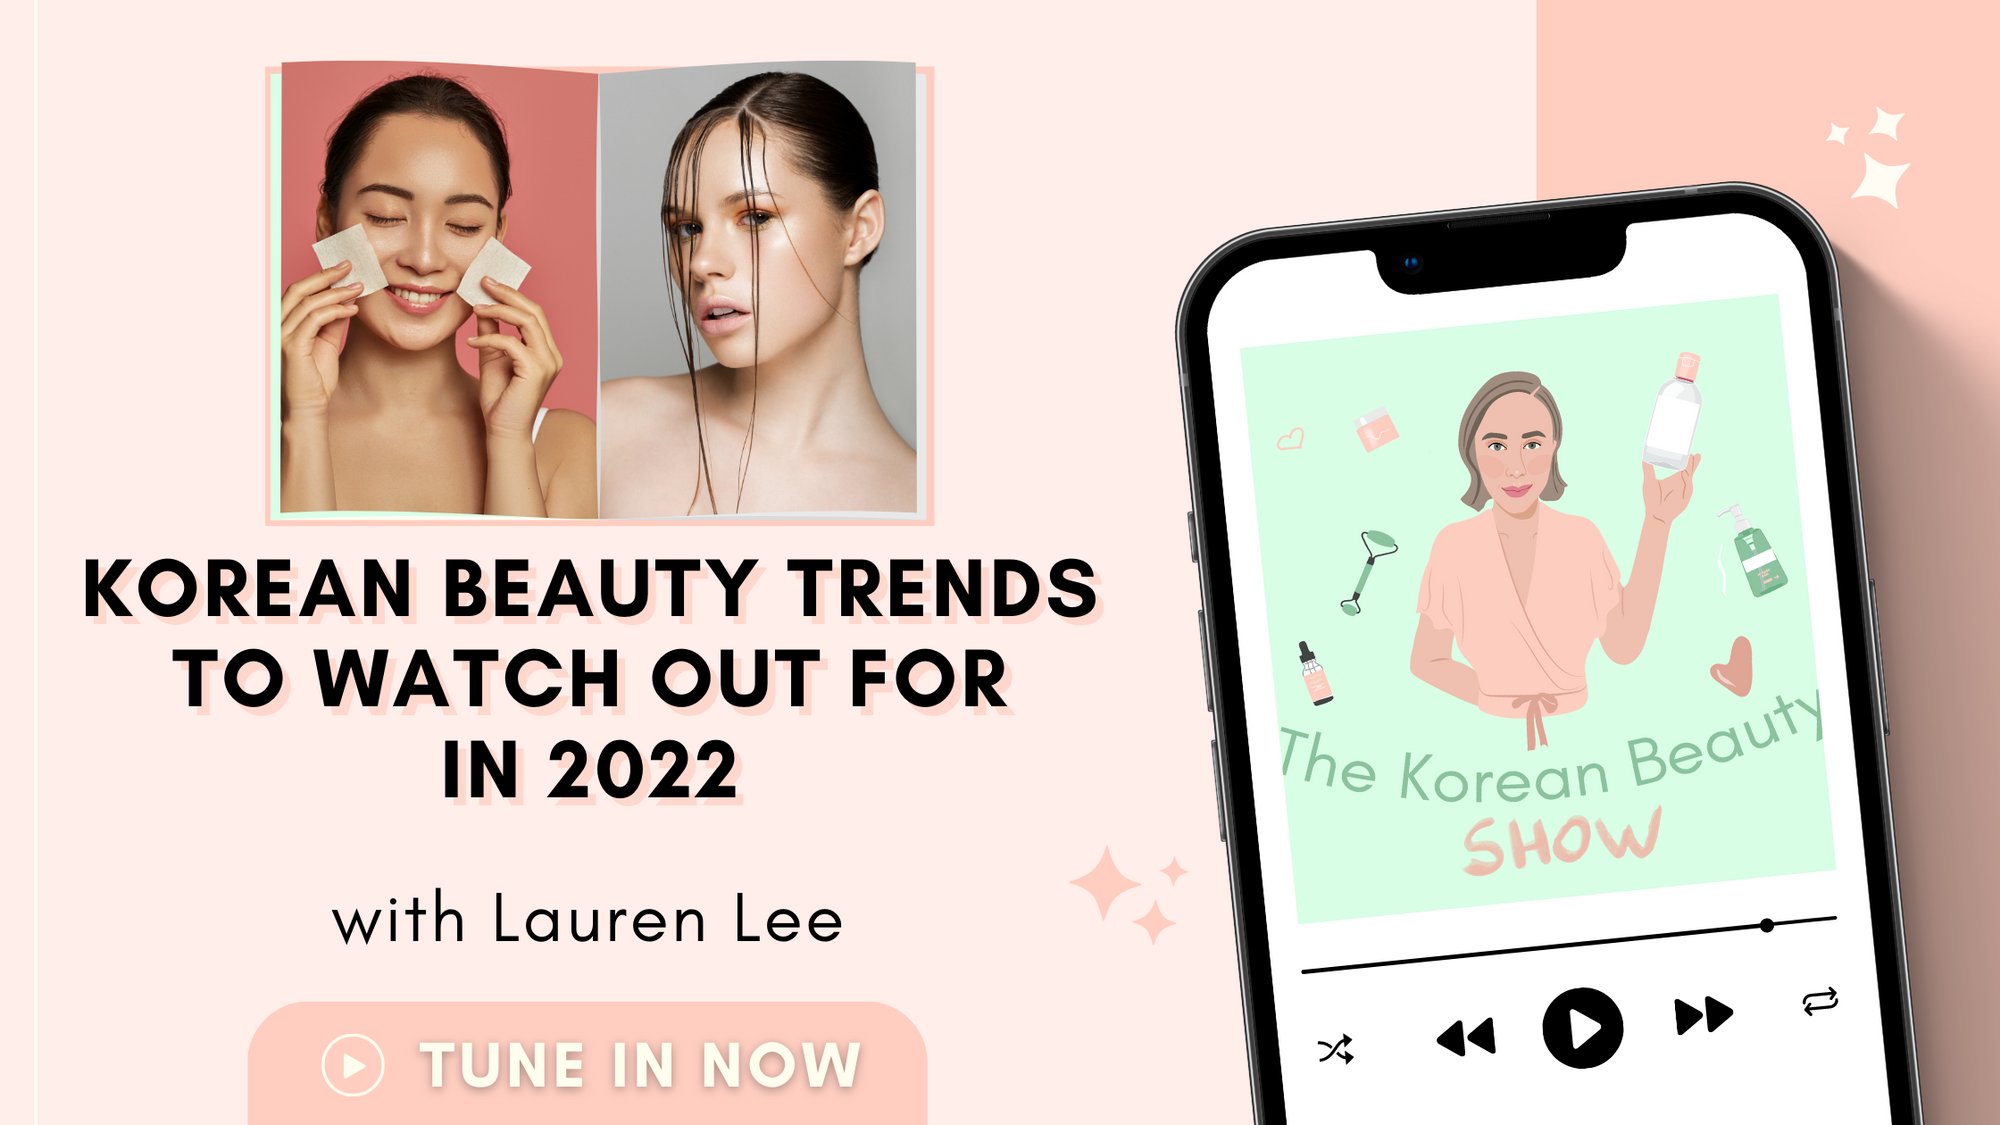 Korean Beauty Trends To Watch Out for In 2022 - Episode 92 of the Korean Beauty Show Podcast